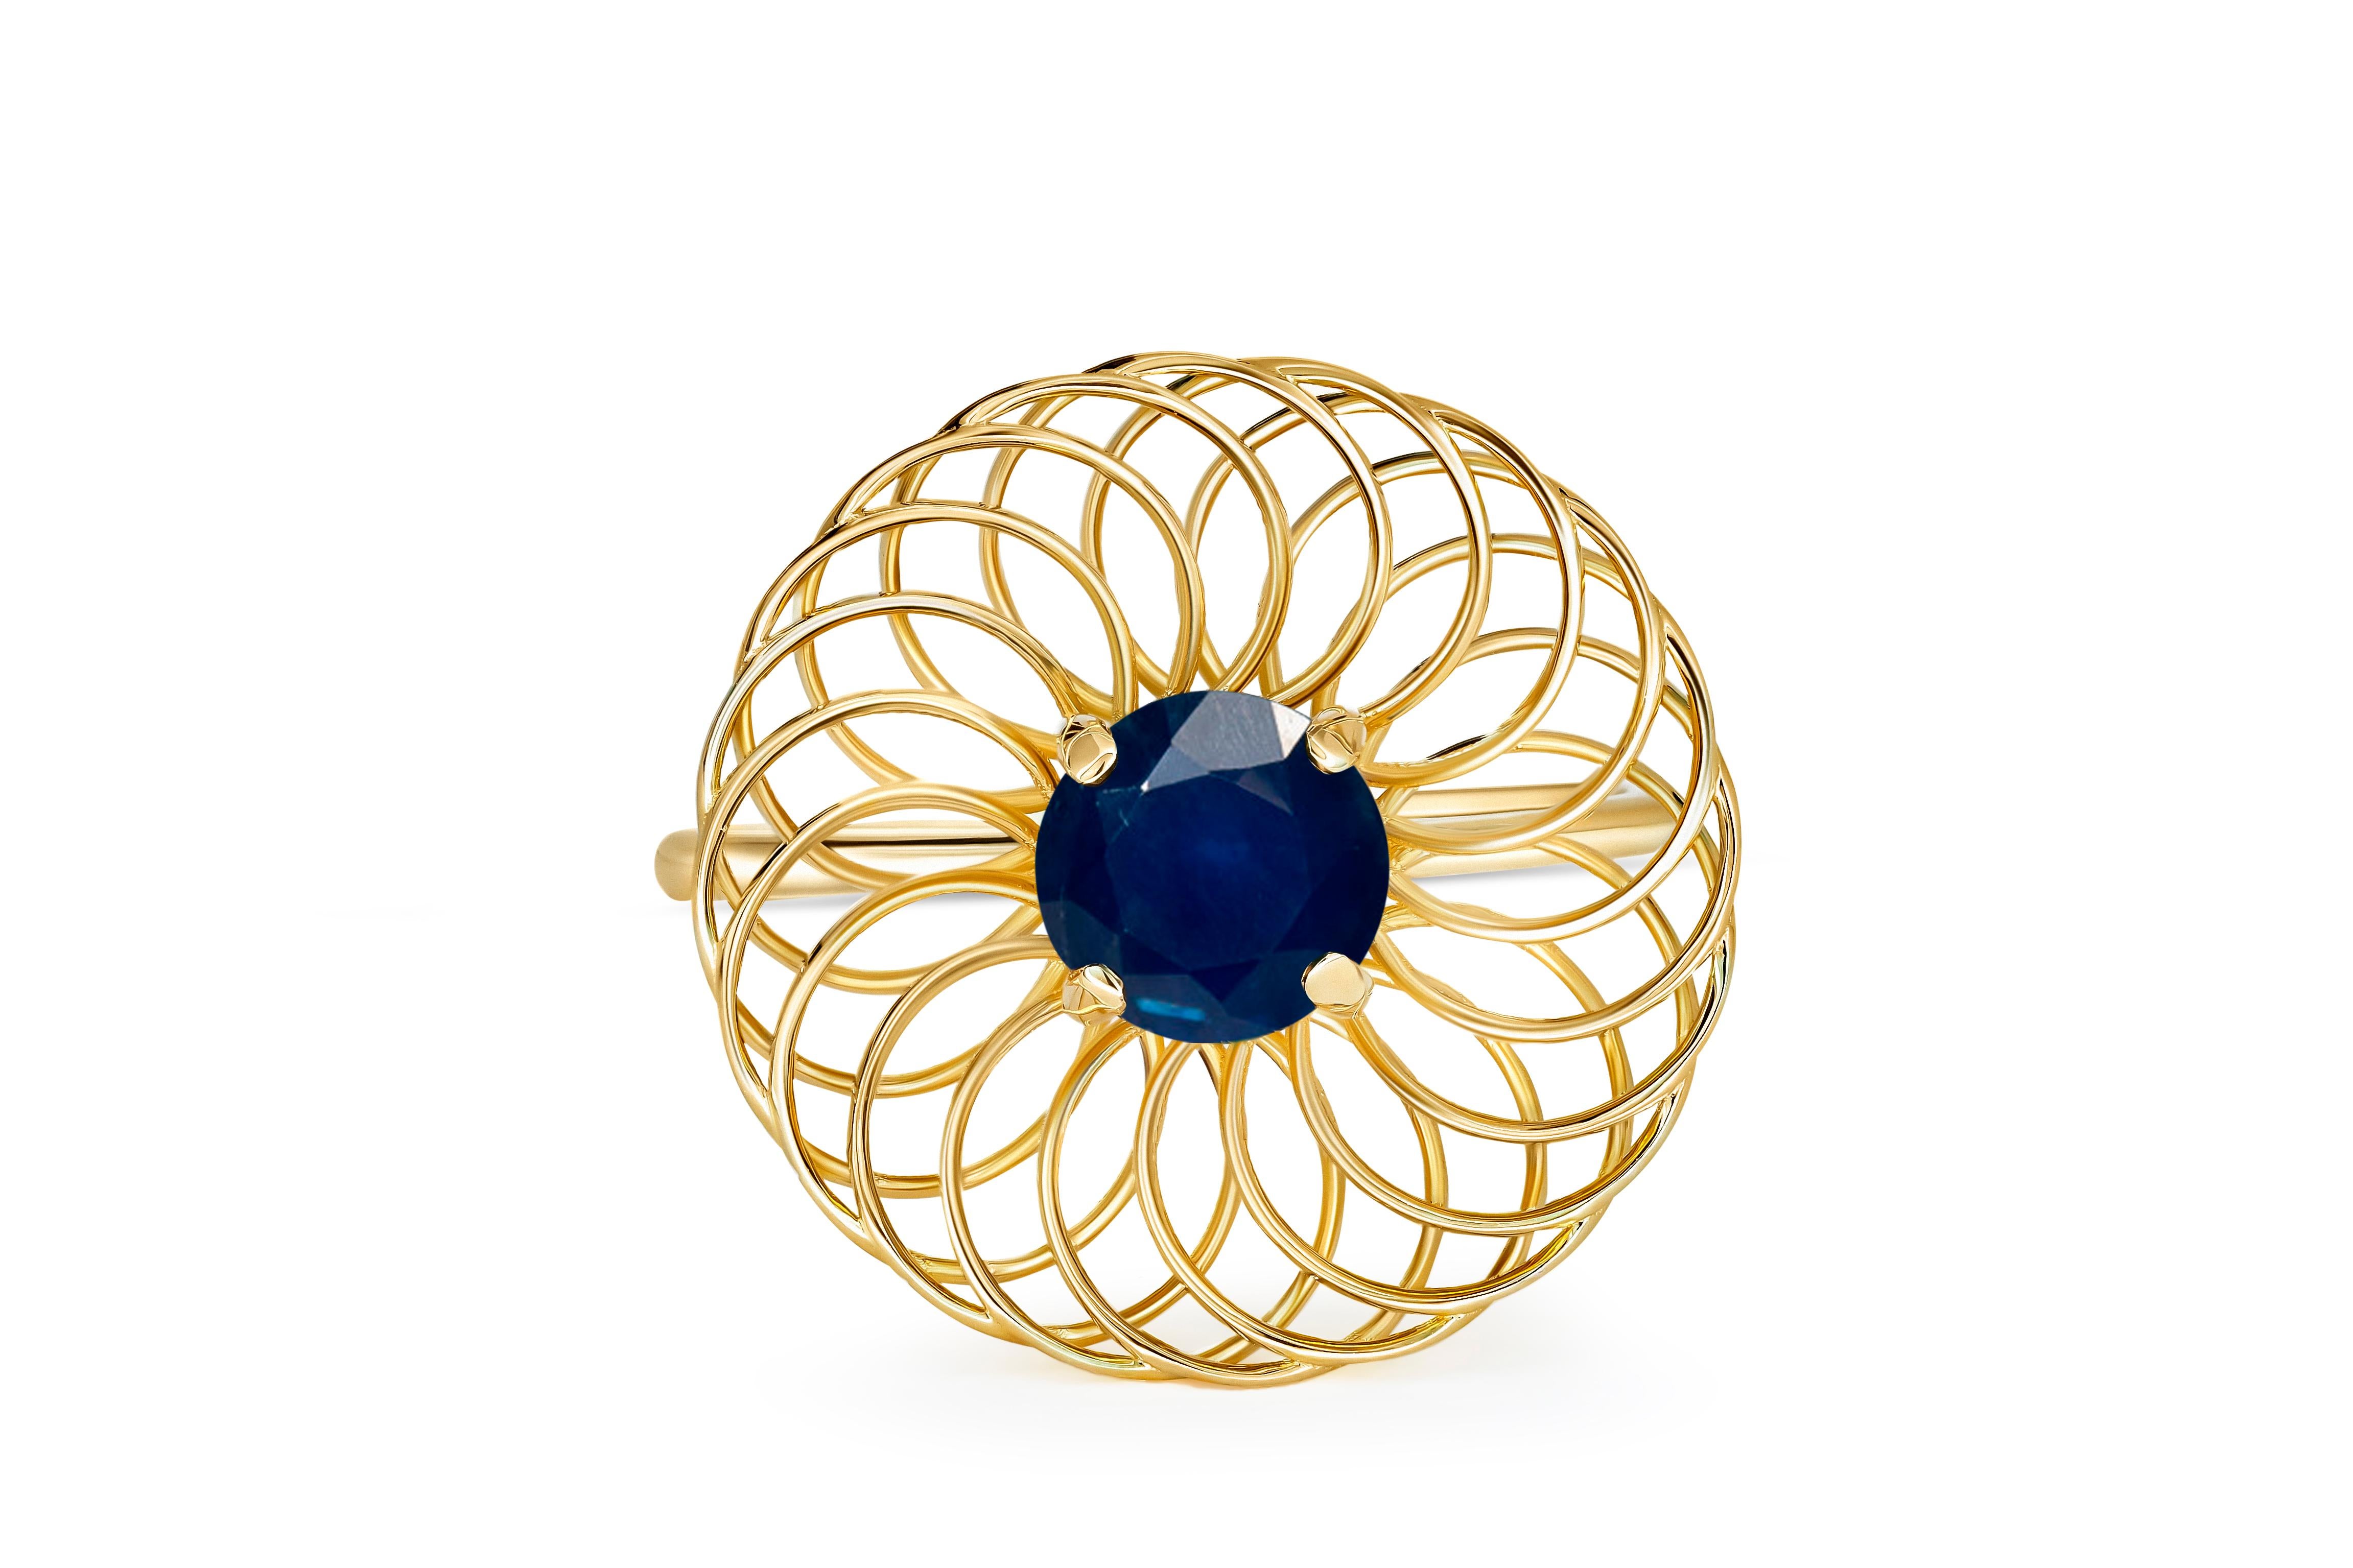 Round sapphire 14k gold ring. 
Sapphire engagement ring. sapphire Geometric ring. Genuine sapphire ring. Sapphire vintage ring.

Metal type: 14kt solid gold
Weight: 2.00g. depends from size.

Gemstones:
Central stone: Natural sapphire
Cut: